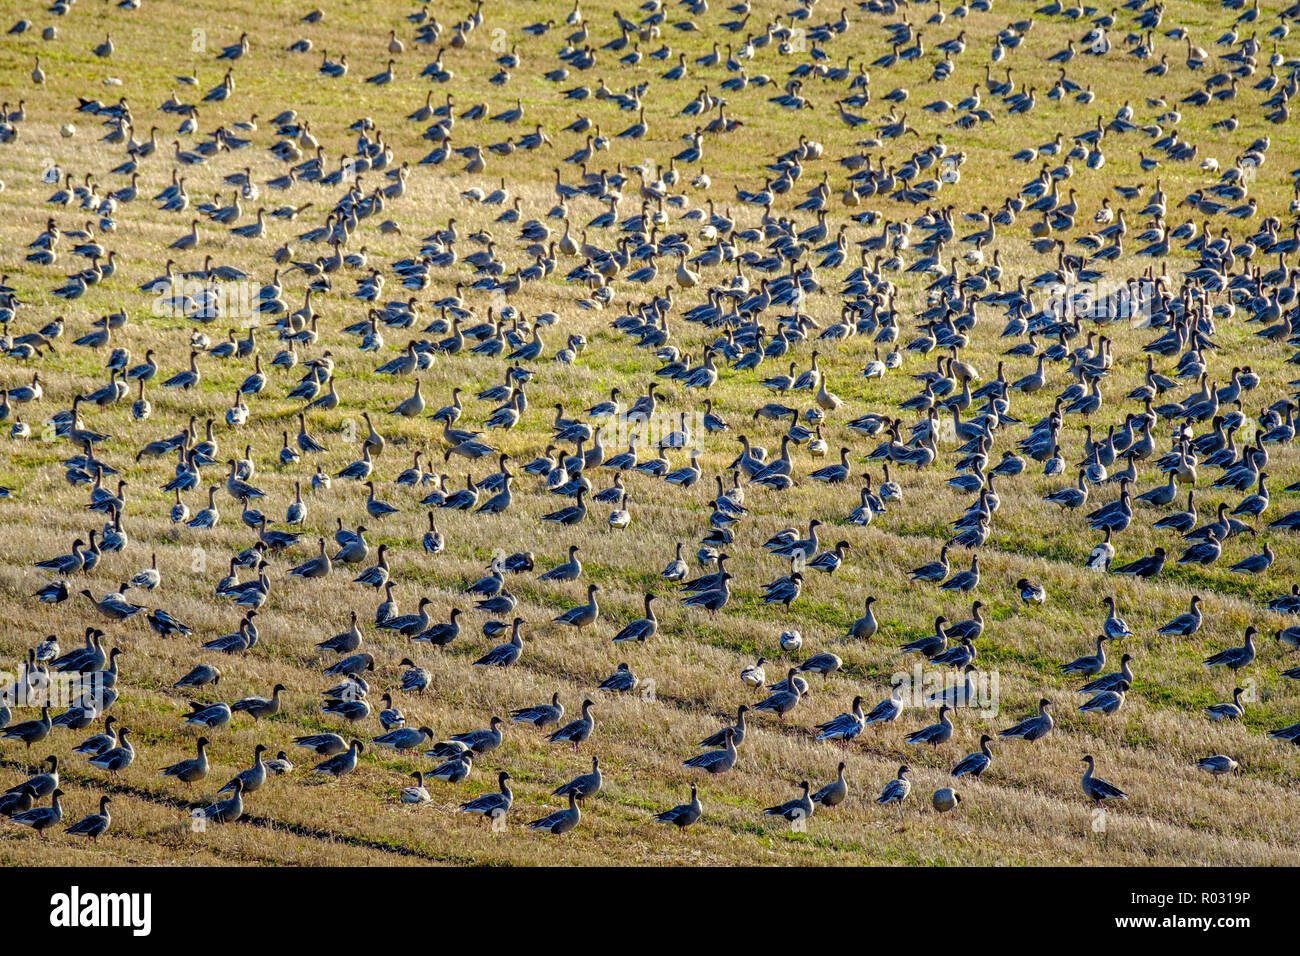 Thousands of migratory pink-footed geese arrive to over winter in South Lanarkshire, Scotland Stock Photo